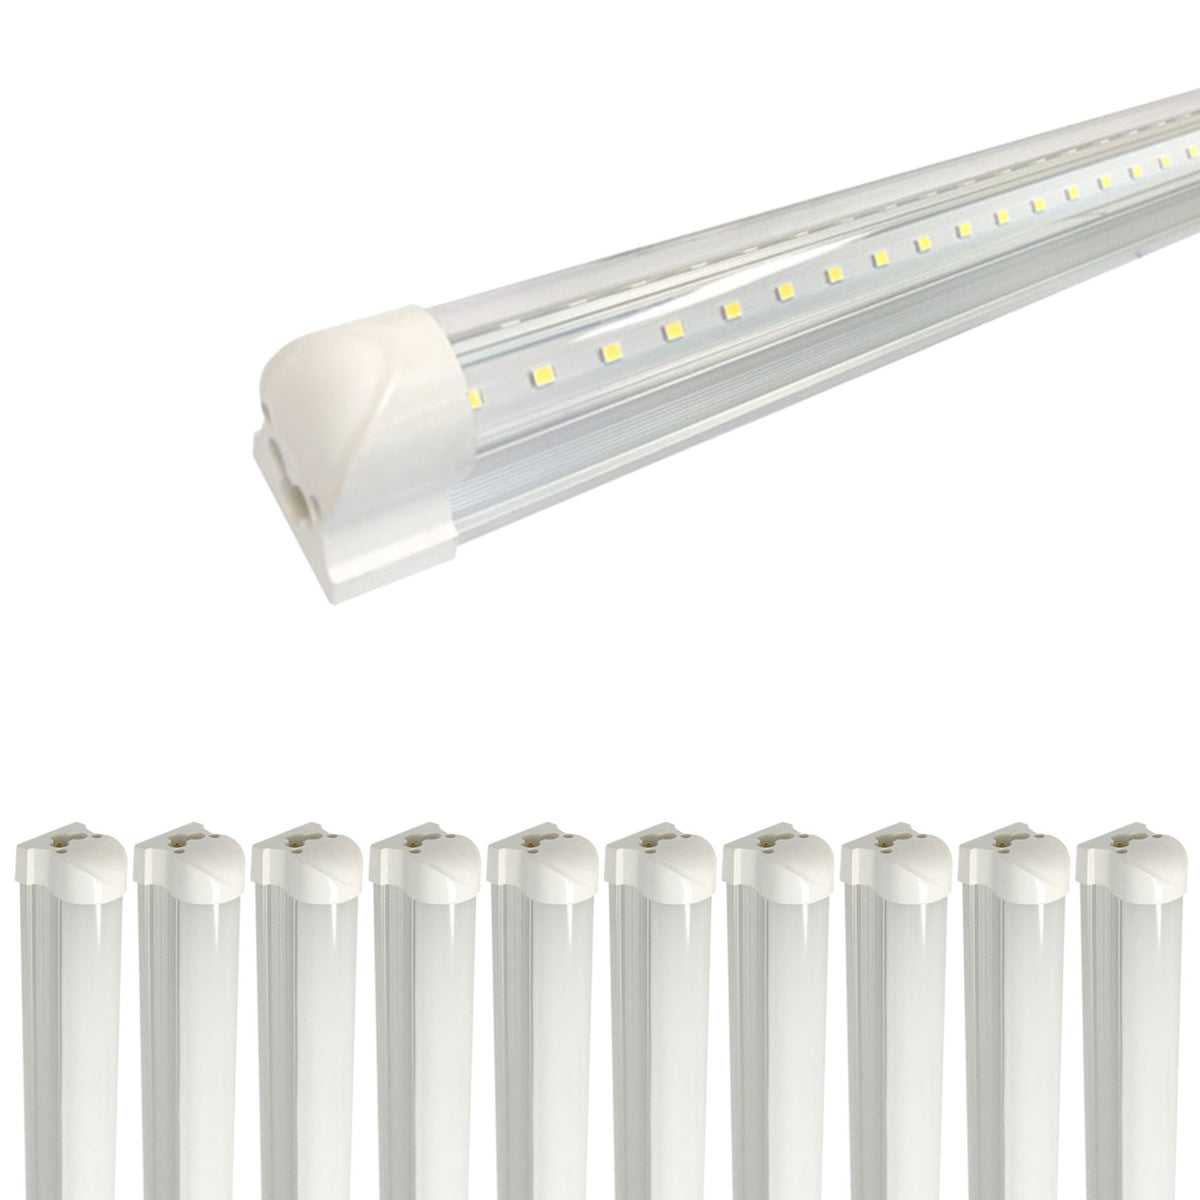 Picture of Viribright 519023 6000K 96 in. 60W Tube LED Tubular Bulb, Clear - Pack of 10